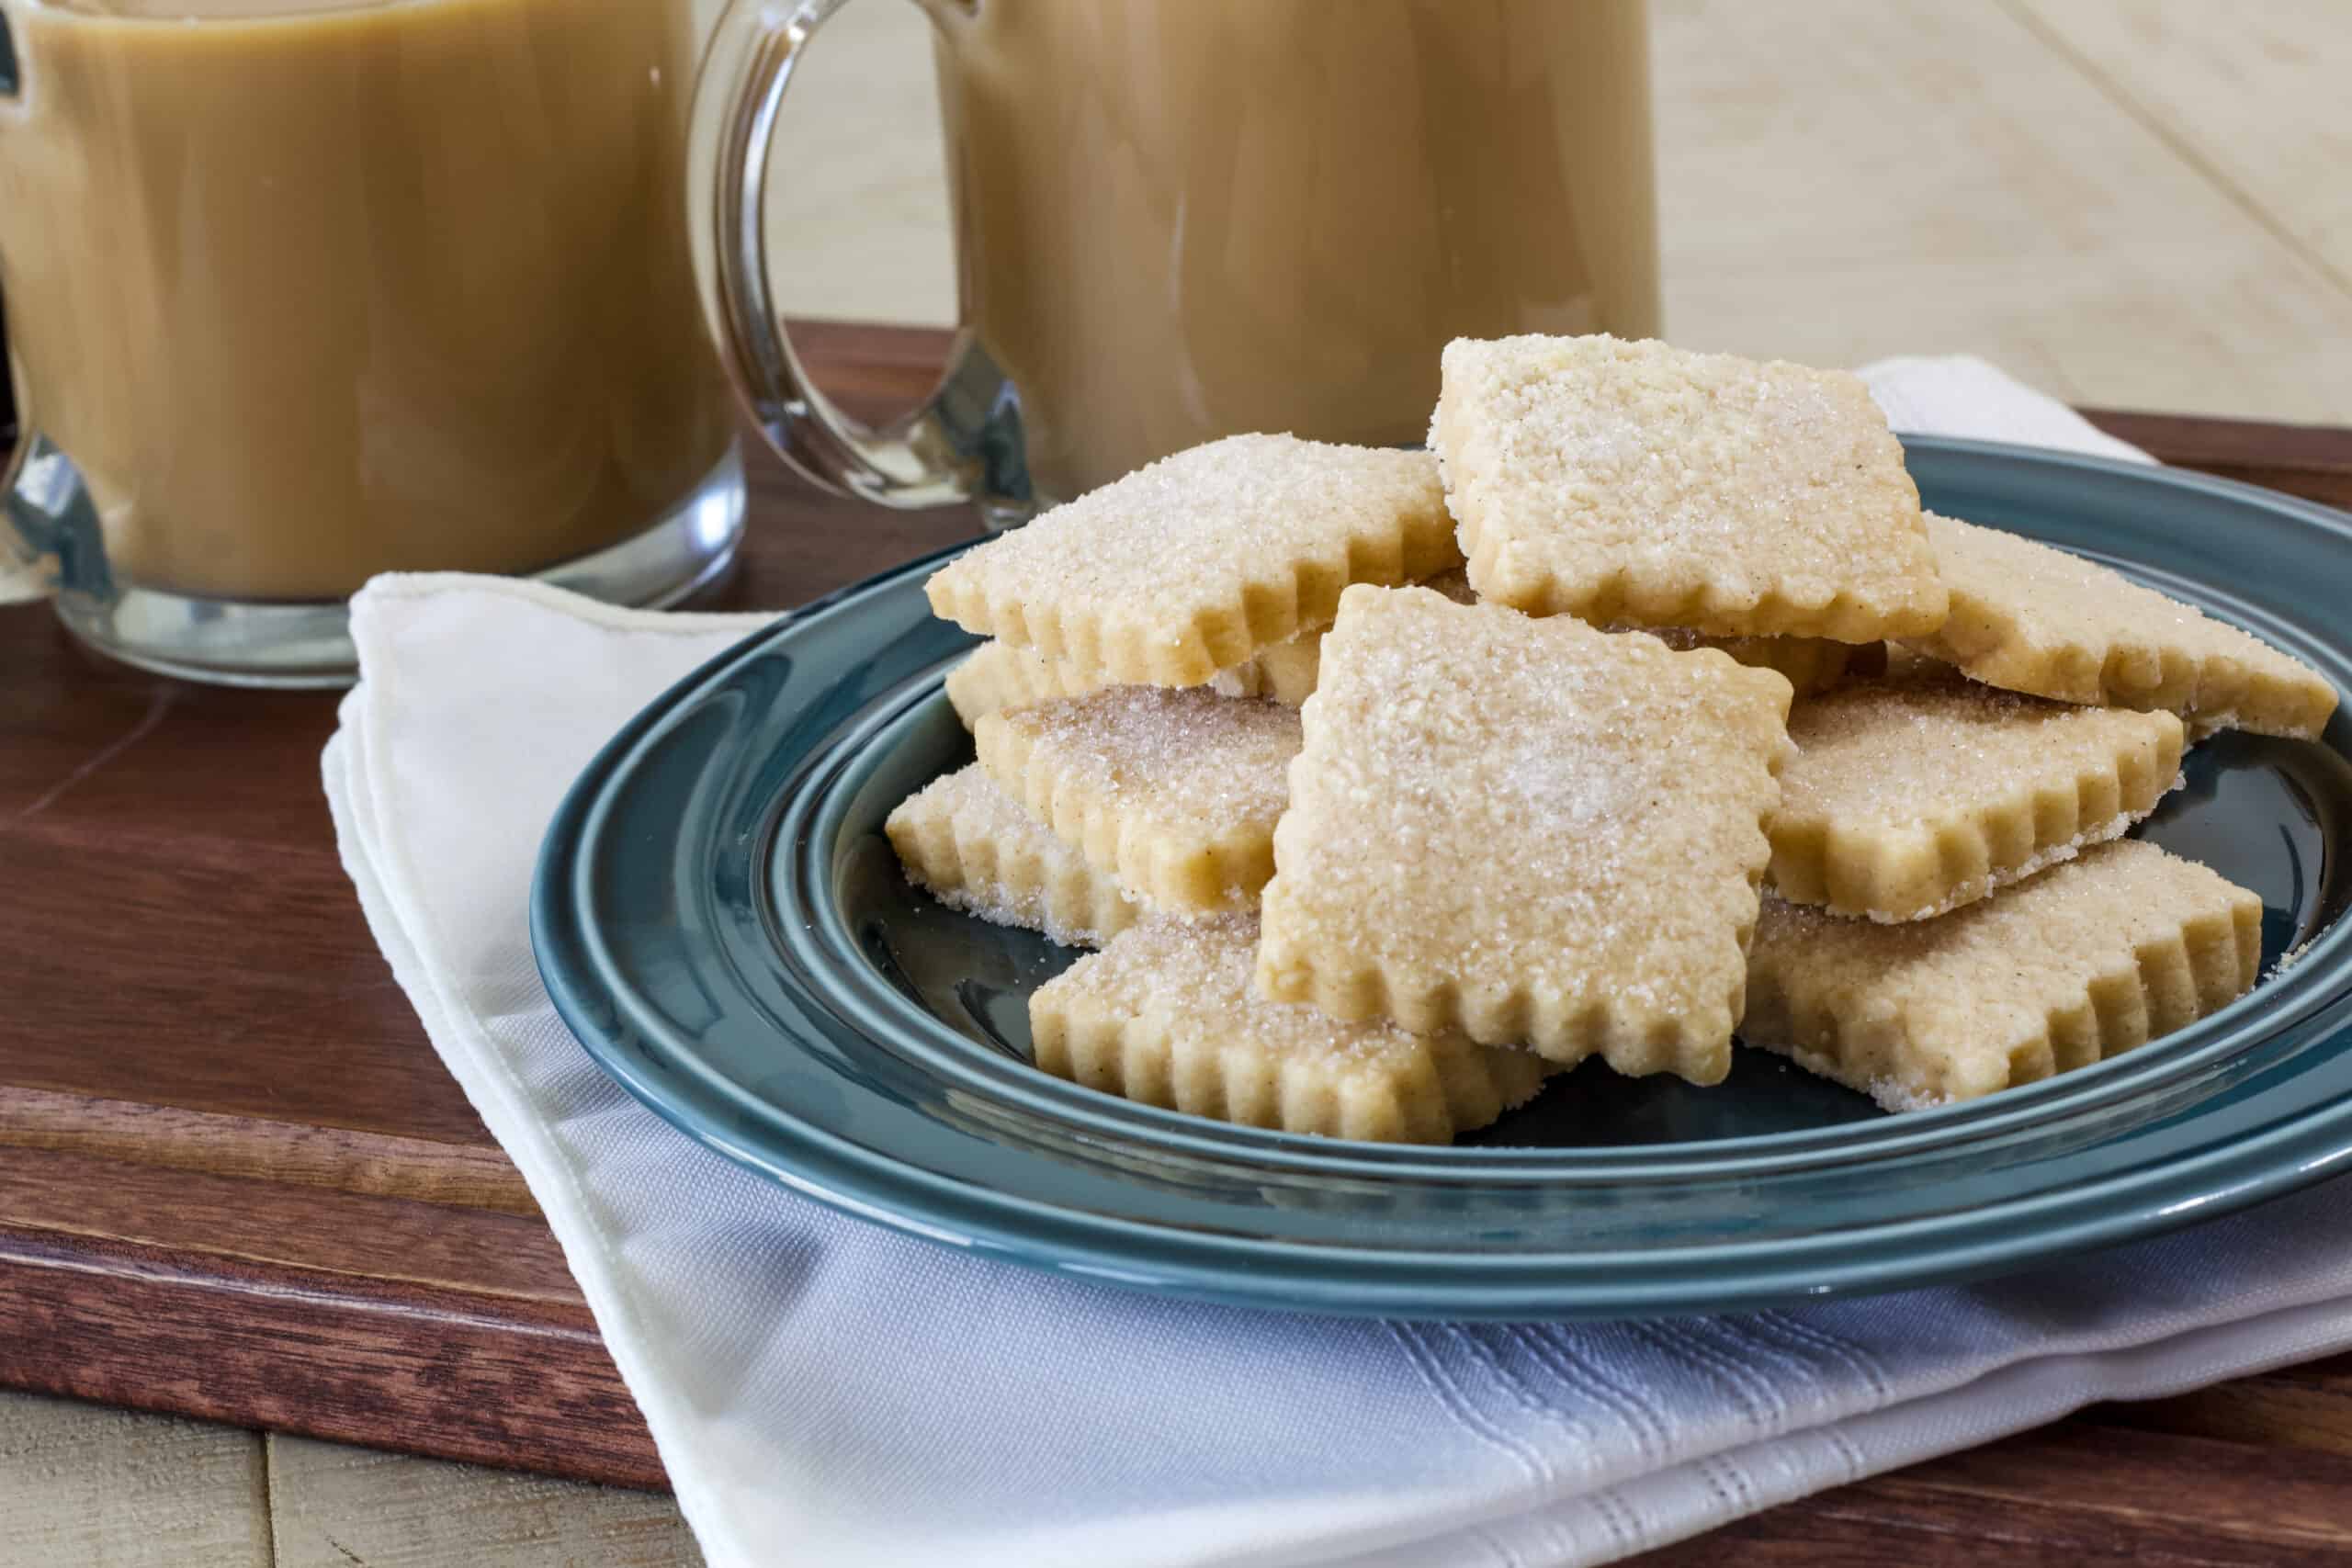 A plate of square cookies on a plate that is on a wooden serving tray with two cups of coffee.